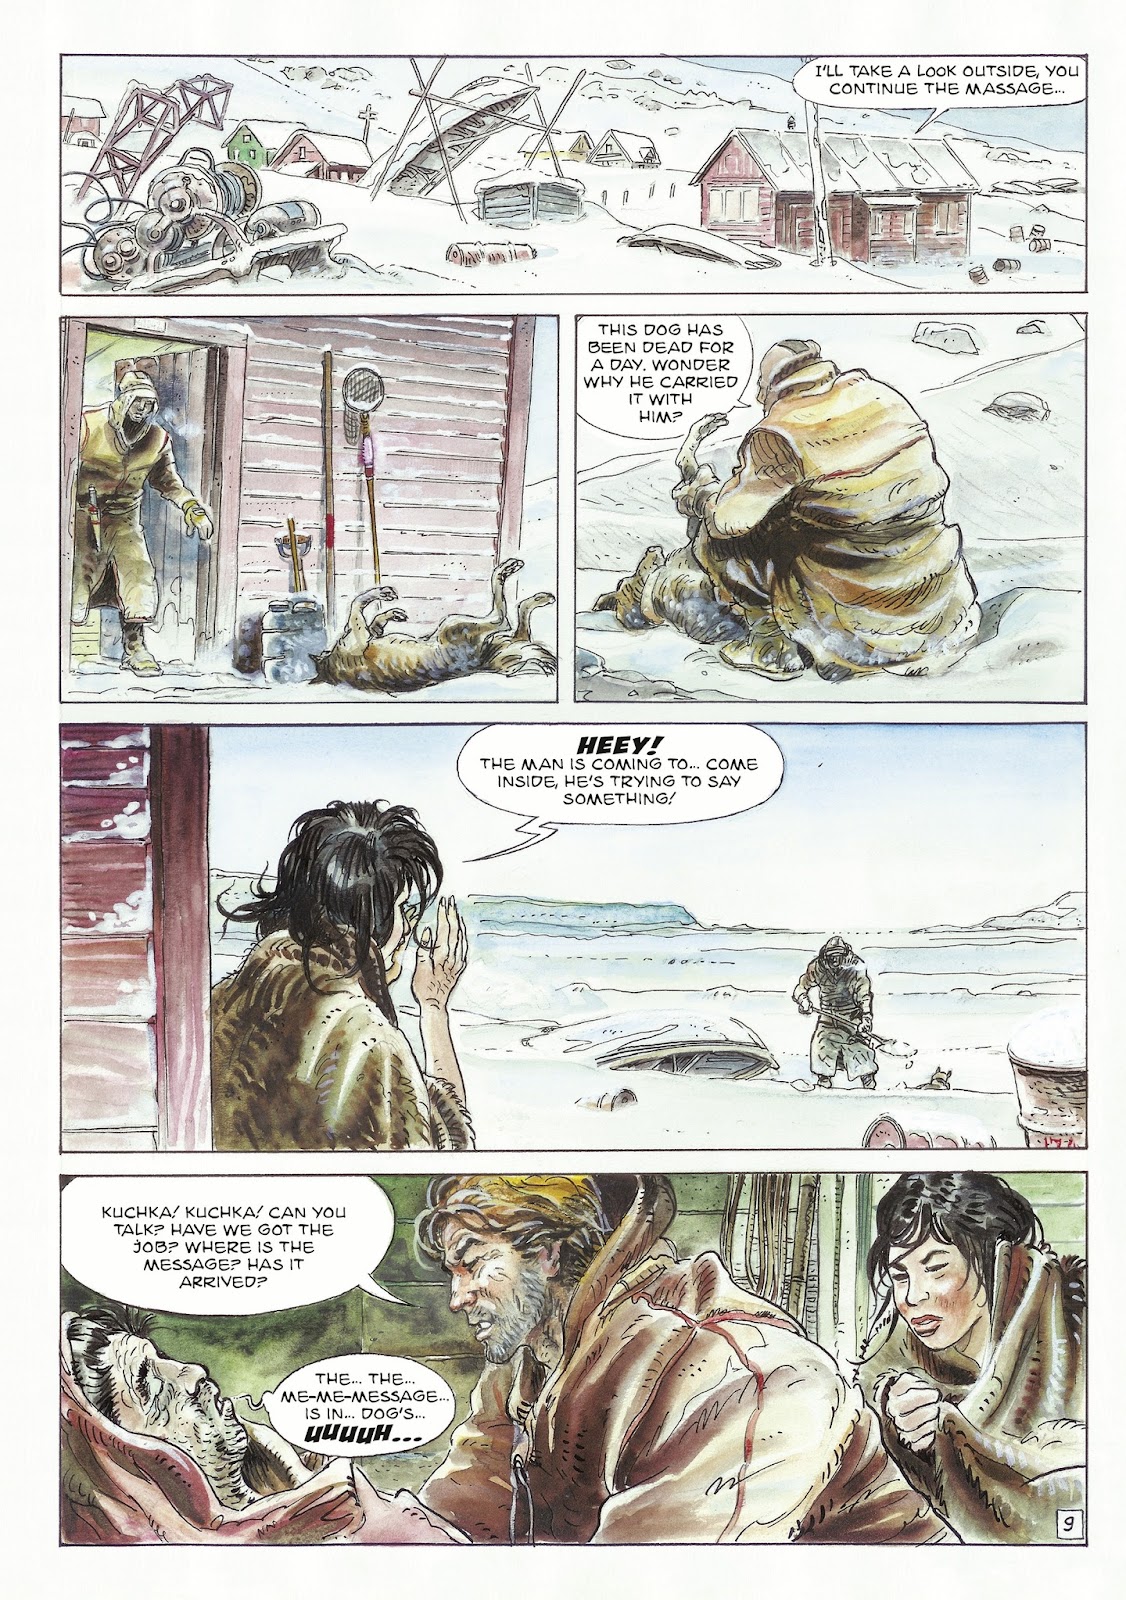 The Man With the Bear issue 1 - Page 11